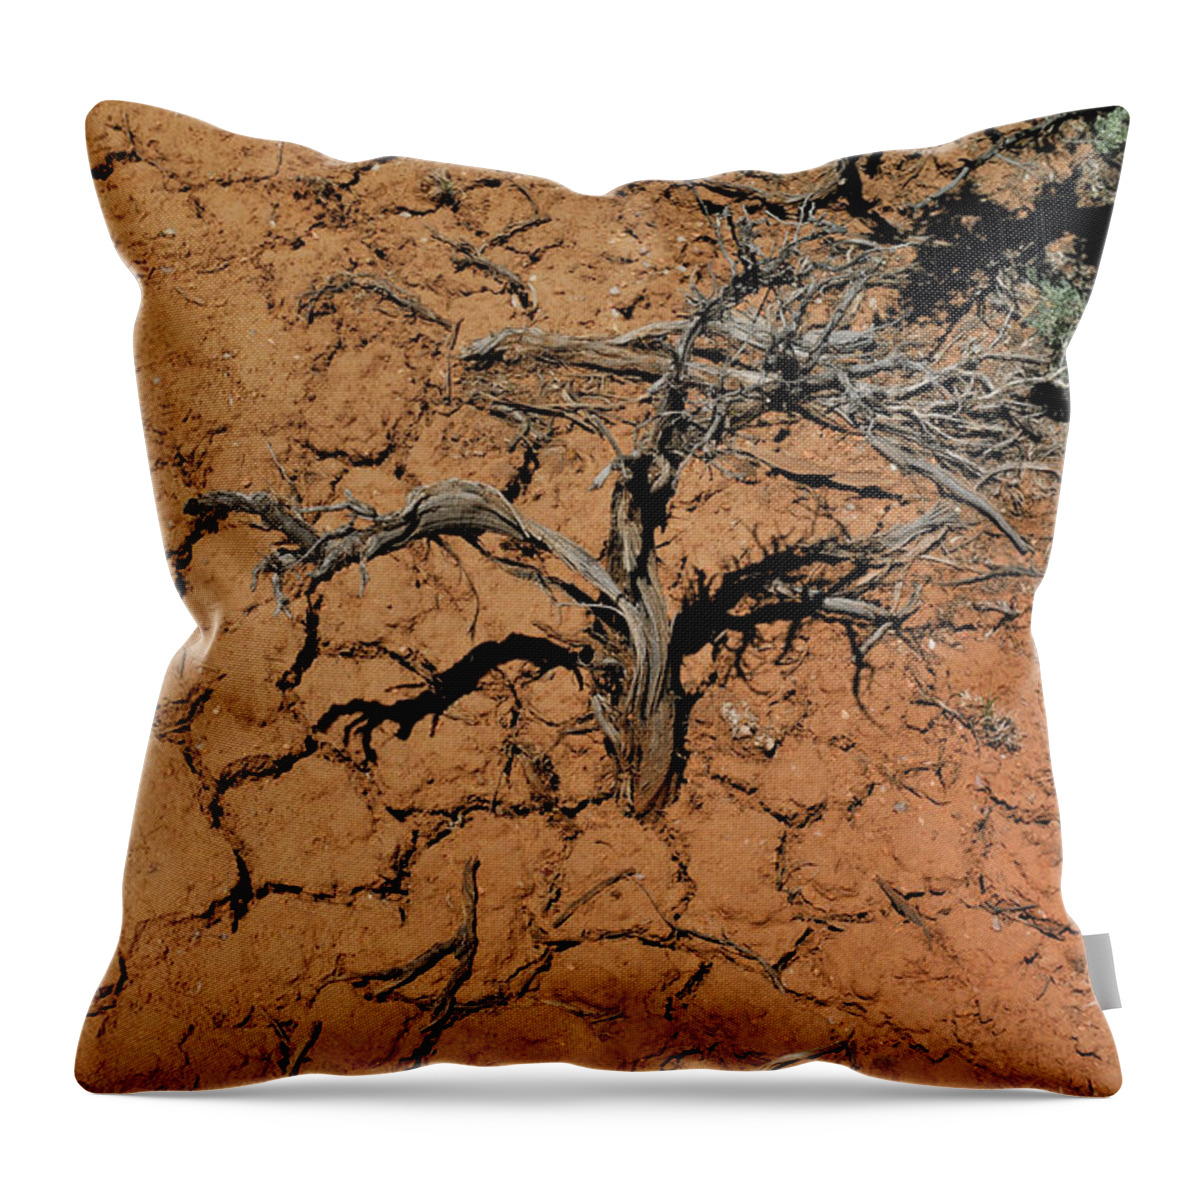 Landscape Throw Pillow featuring the photograph The Parched Earth by Ron Cline